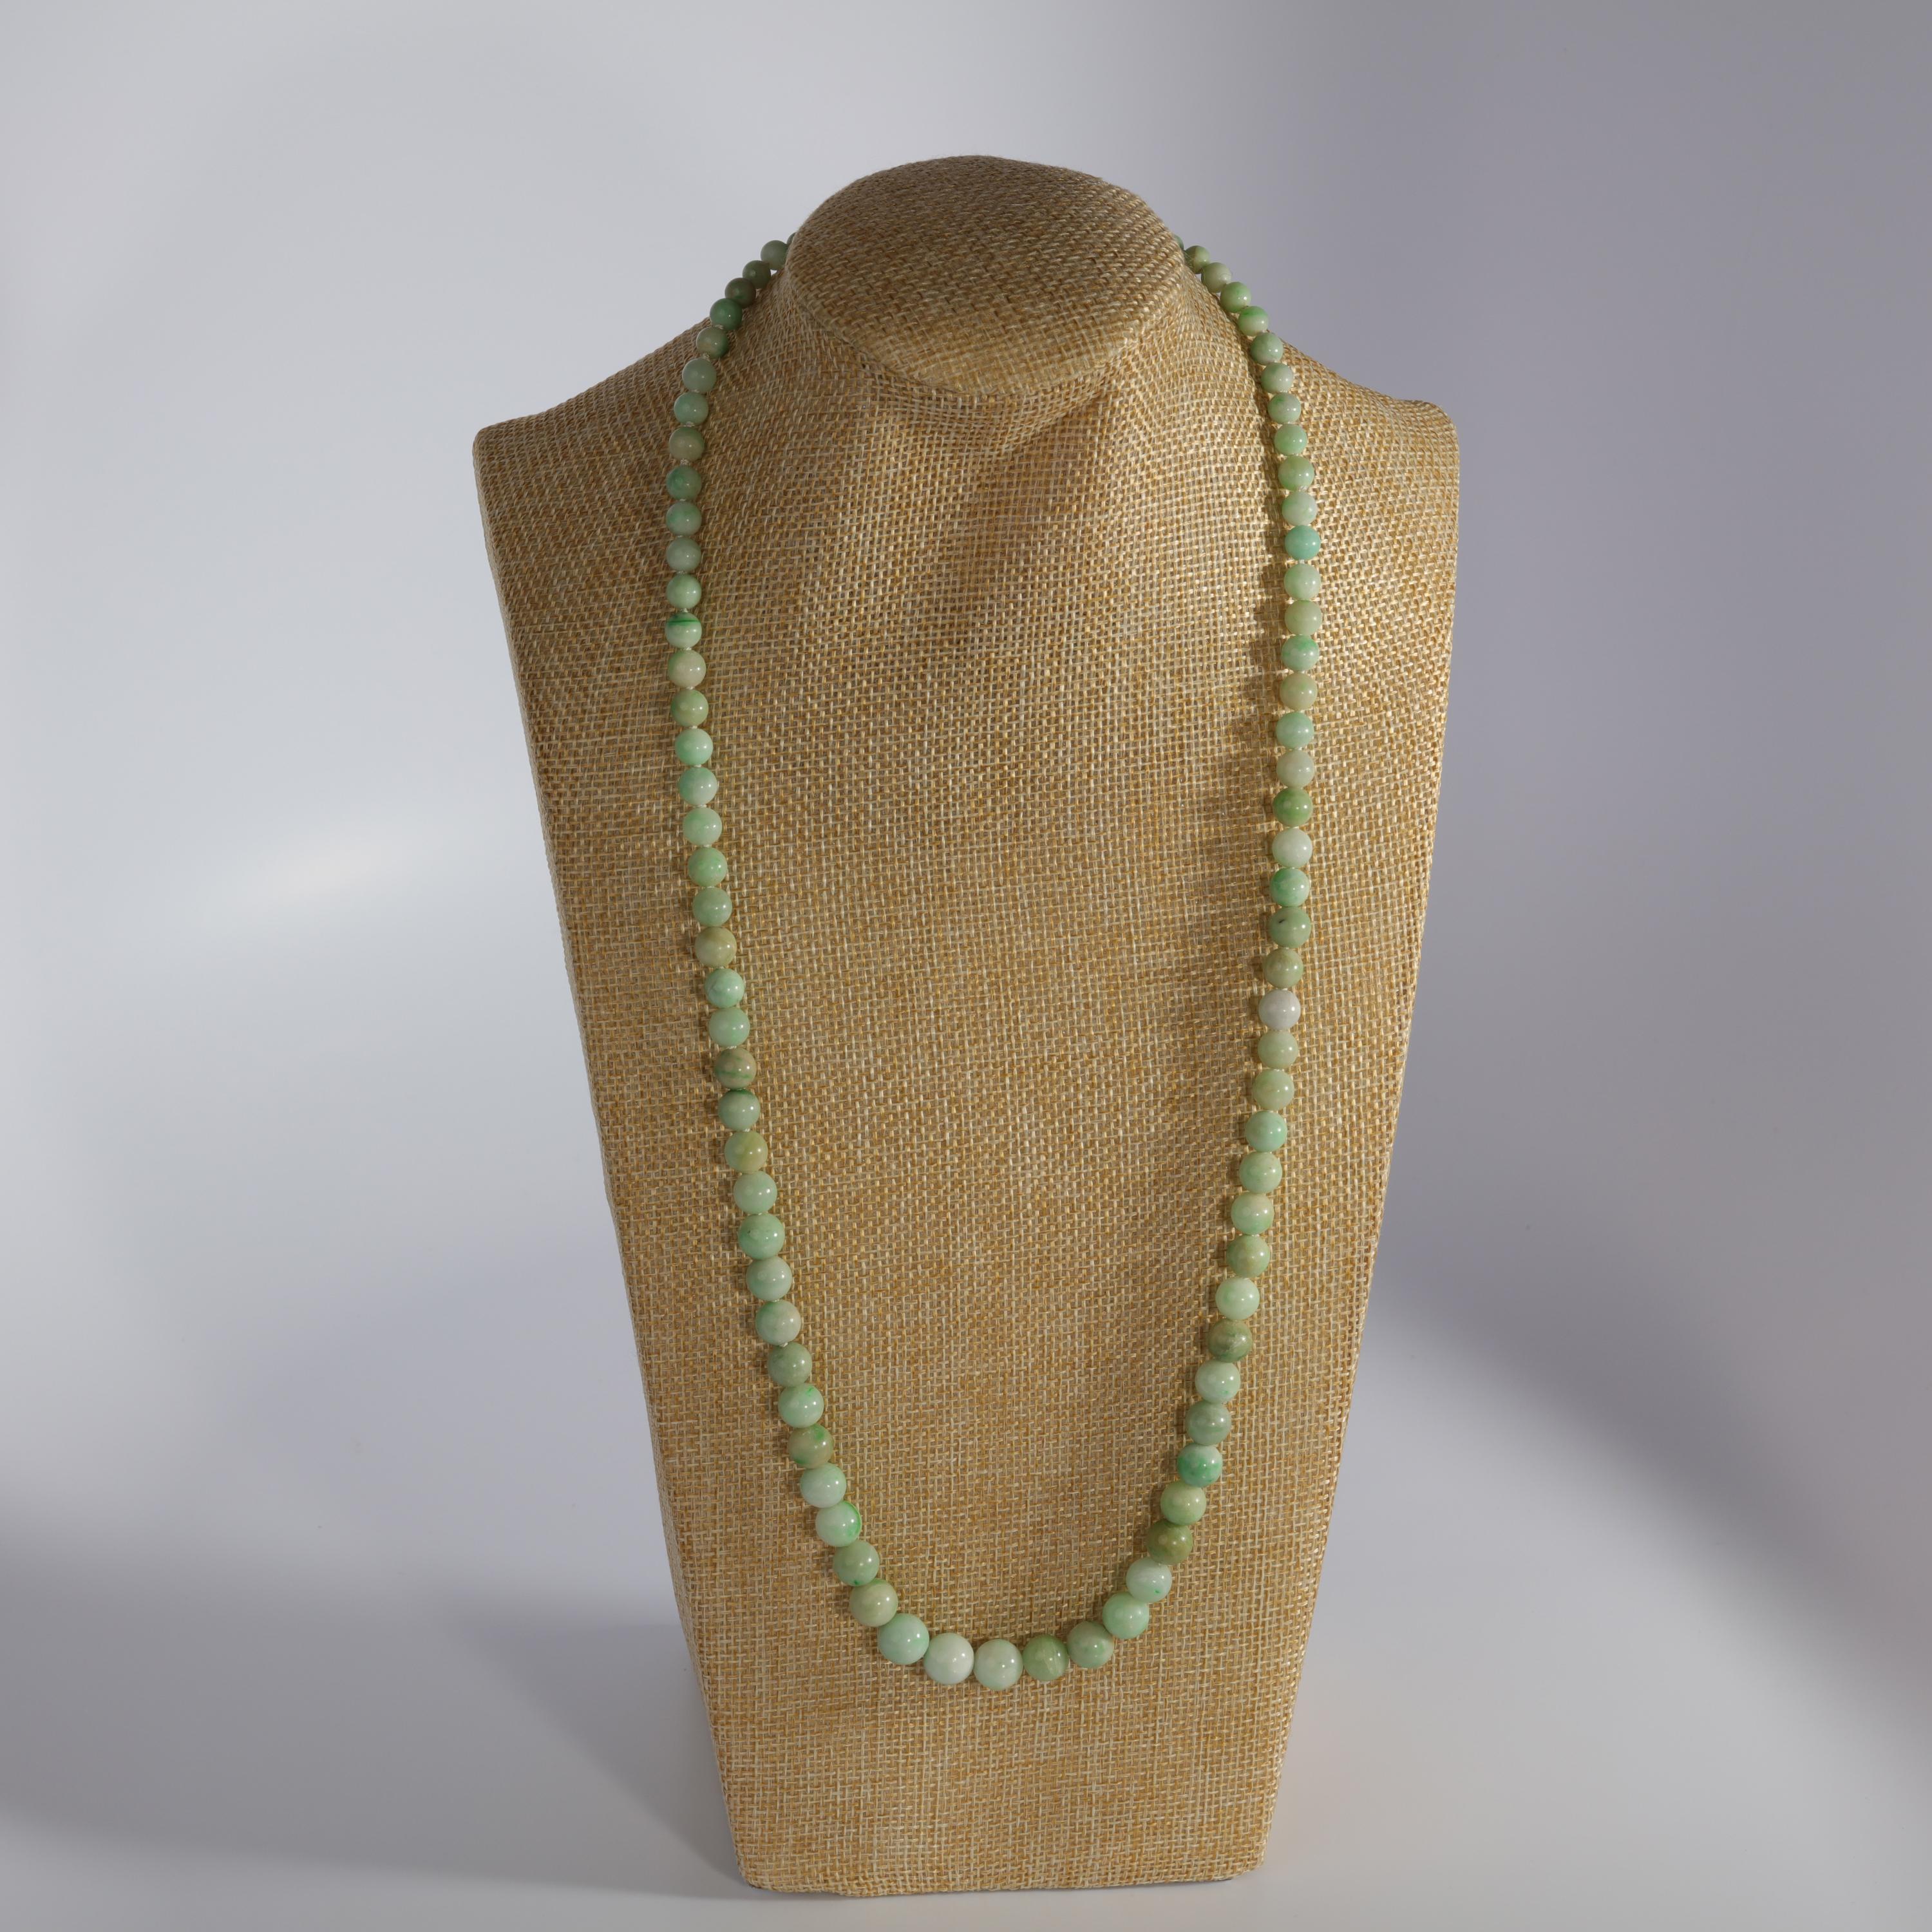 This strand of 89 hand-carved jadeite jade beads is quite rare because these jade beads are imperfect: look at that one: a soft mint-green with the tiniest patch of oxidized iron; or this one here with a natural fissure that's ever so slightly